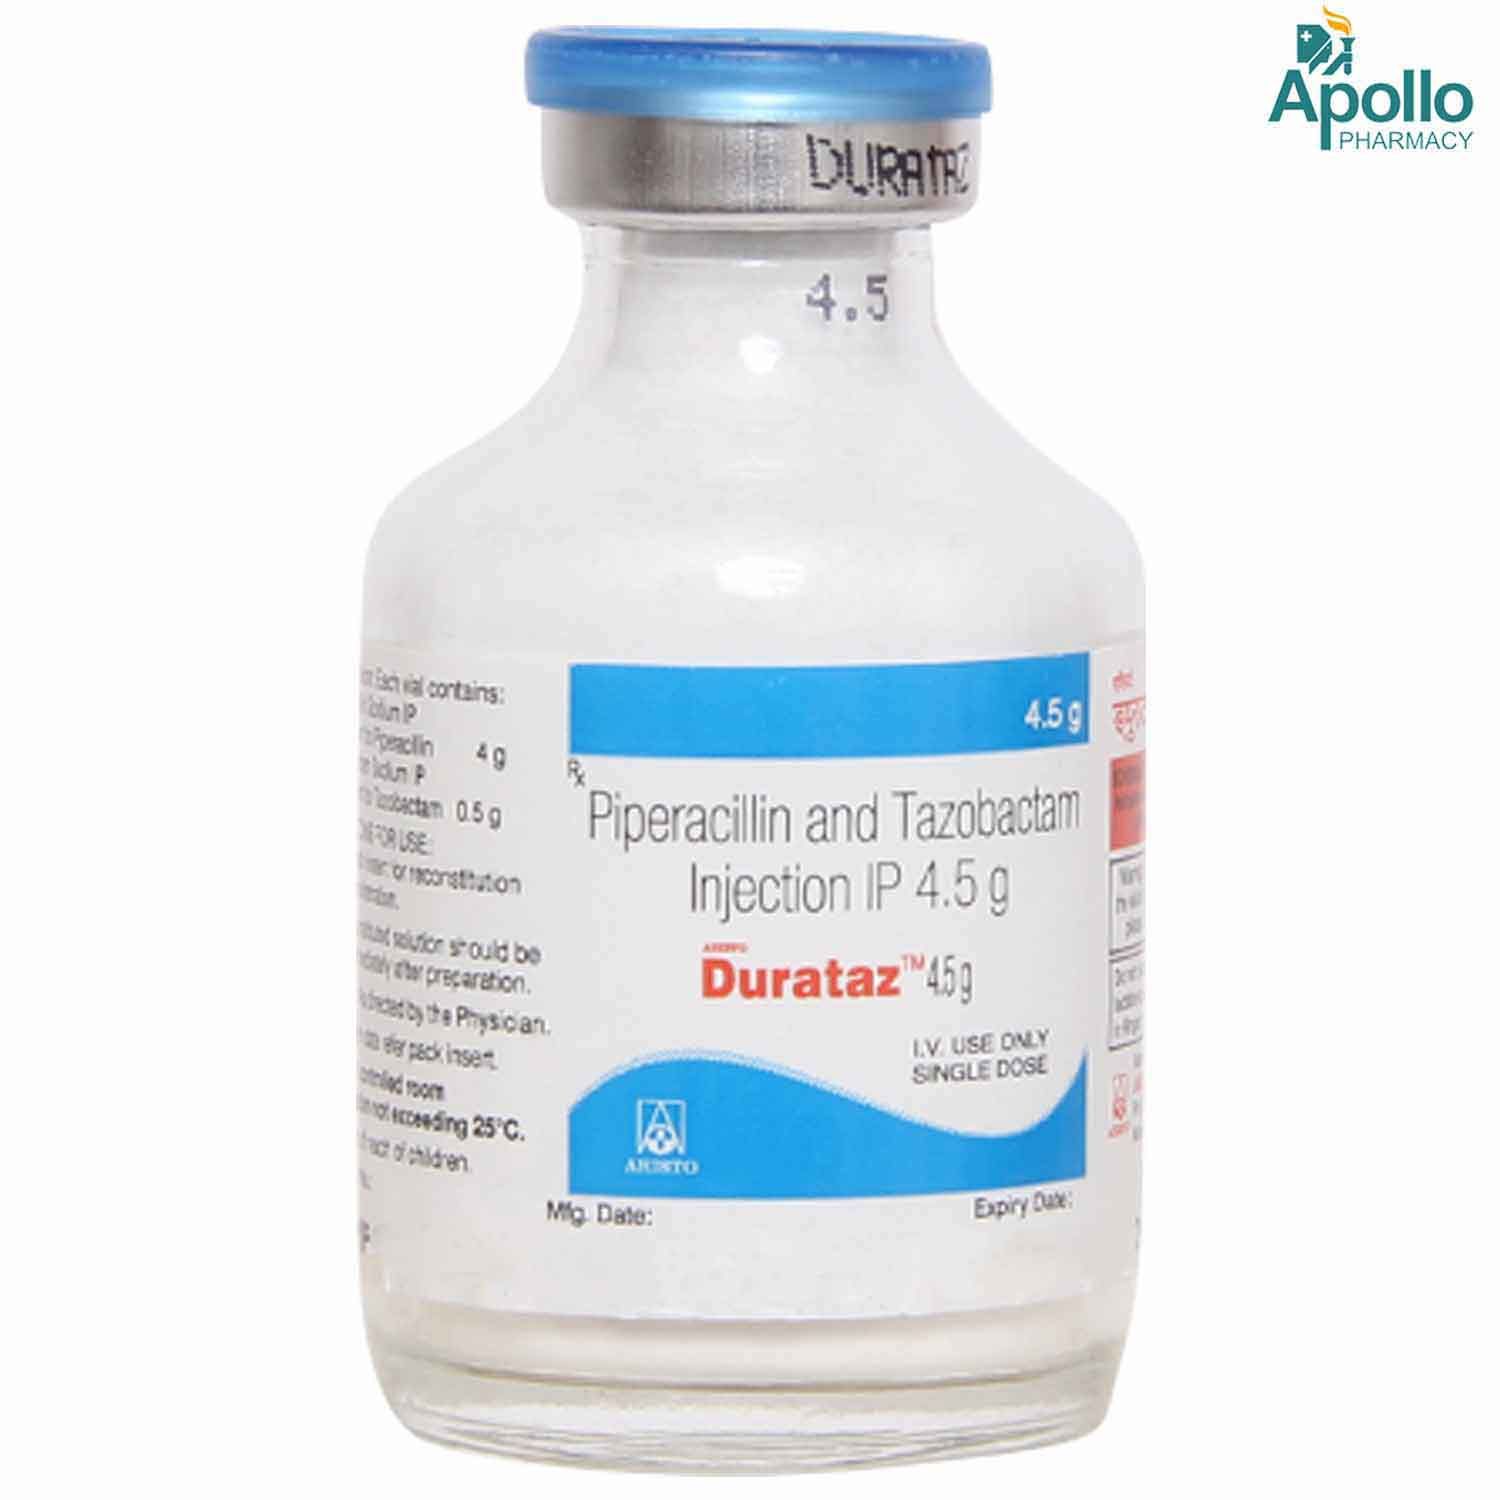 Durataz 4.5 gm Injection 1's Price, Uses, Side Effects, Composition